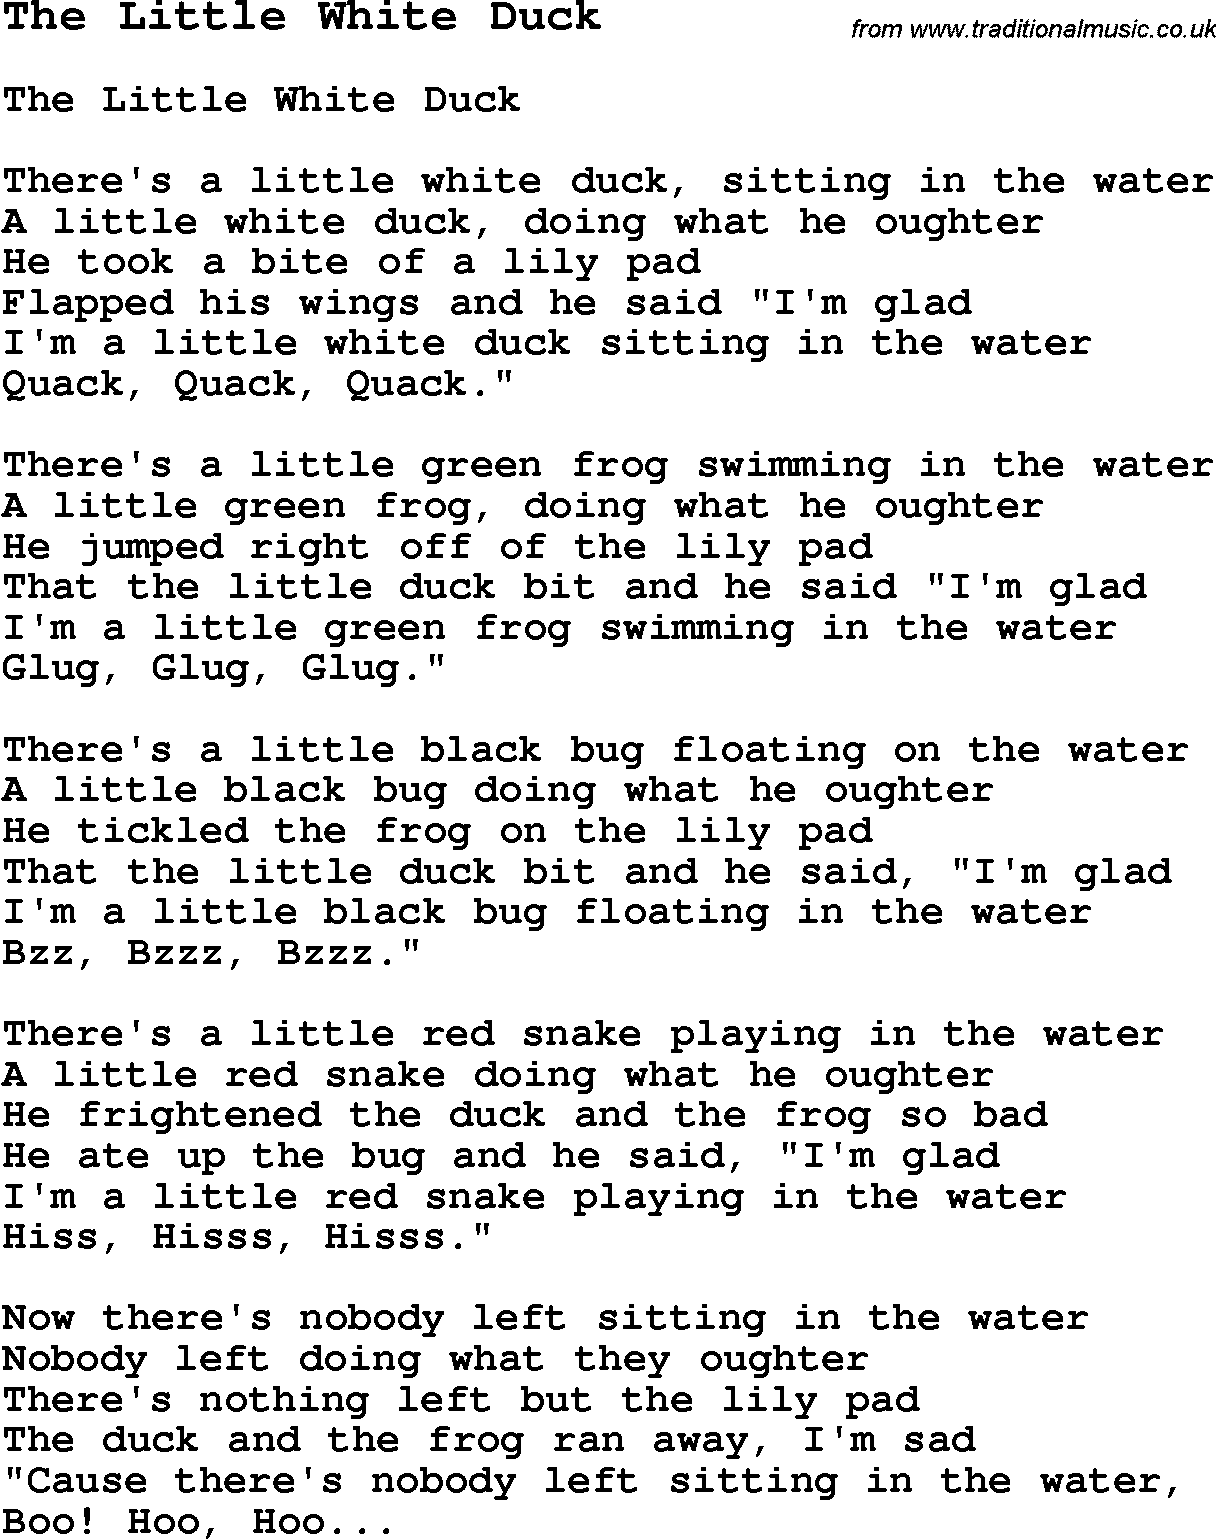 Summer-Camp Song, The Little White Duck, with lyrics and chords for Ukulele, Guitar Banjo etc.